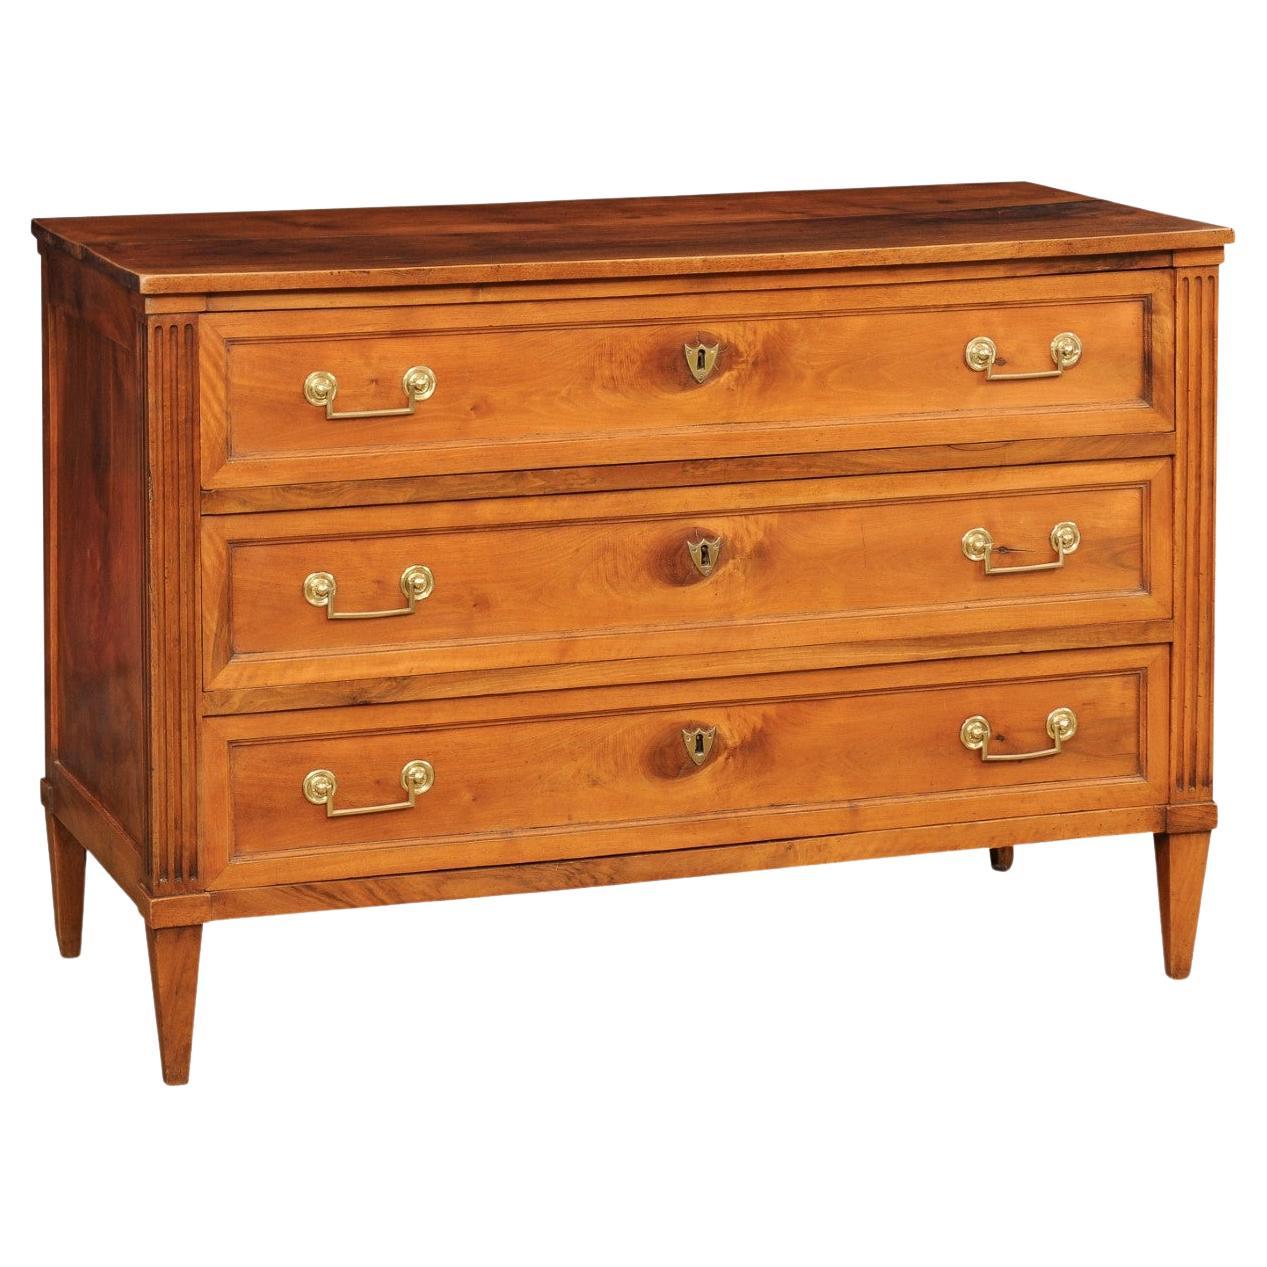 French Louis XVI Style Early 19th Century Walnut Commode with Three Drawers For Sale